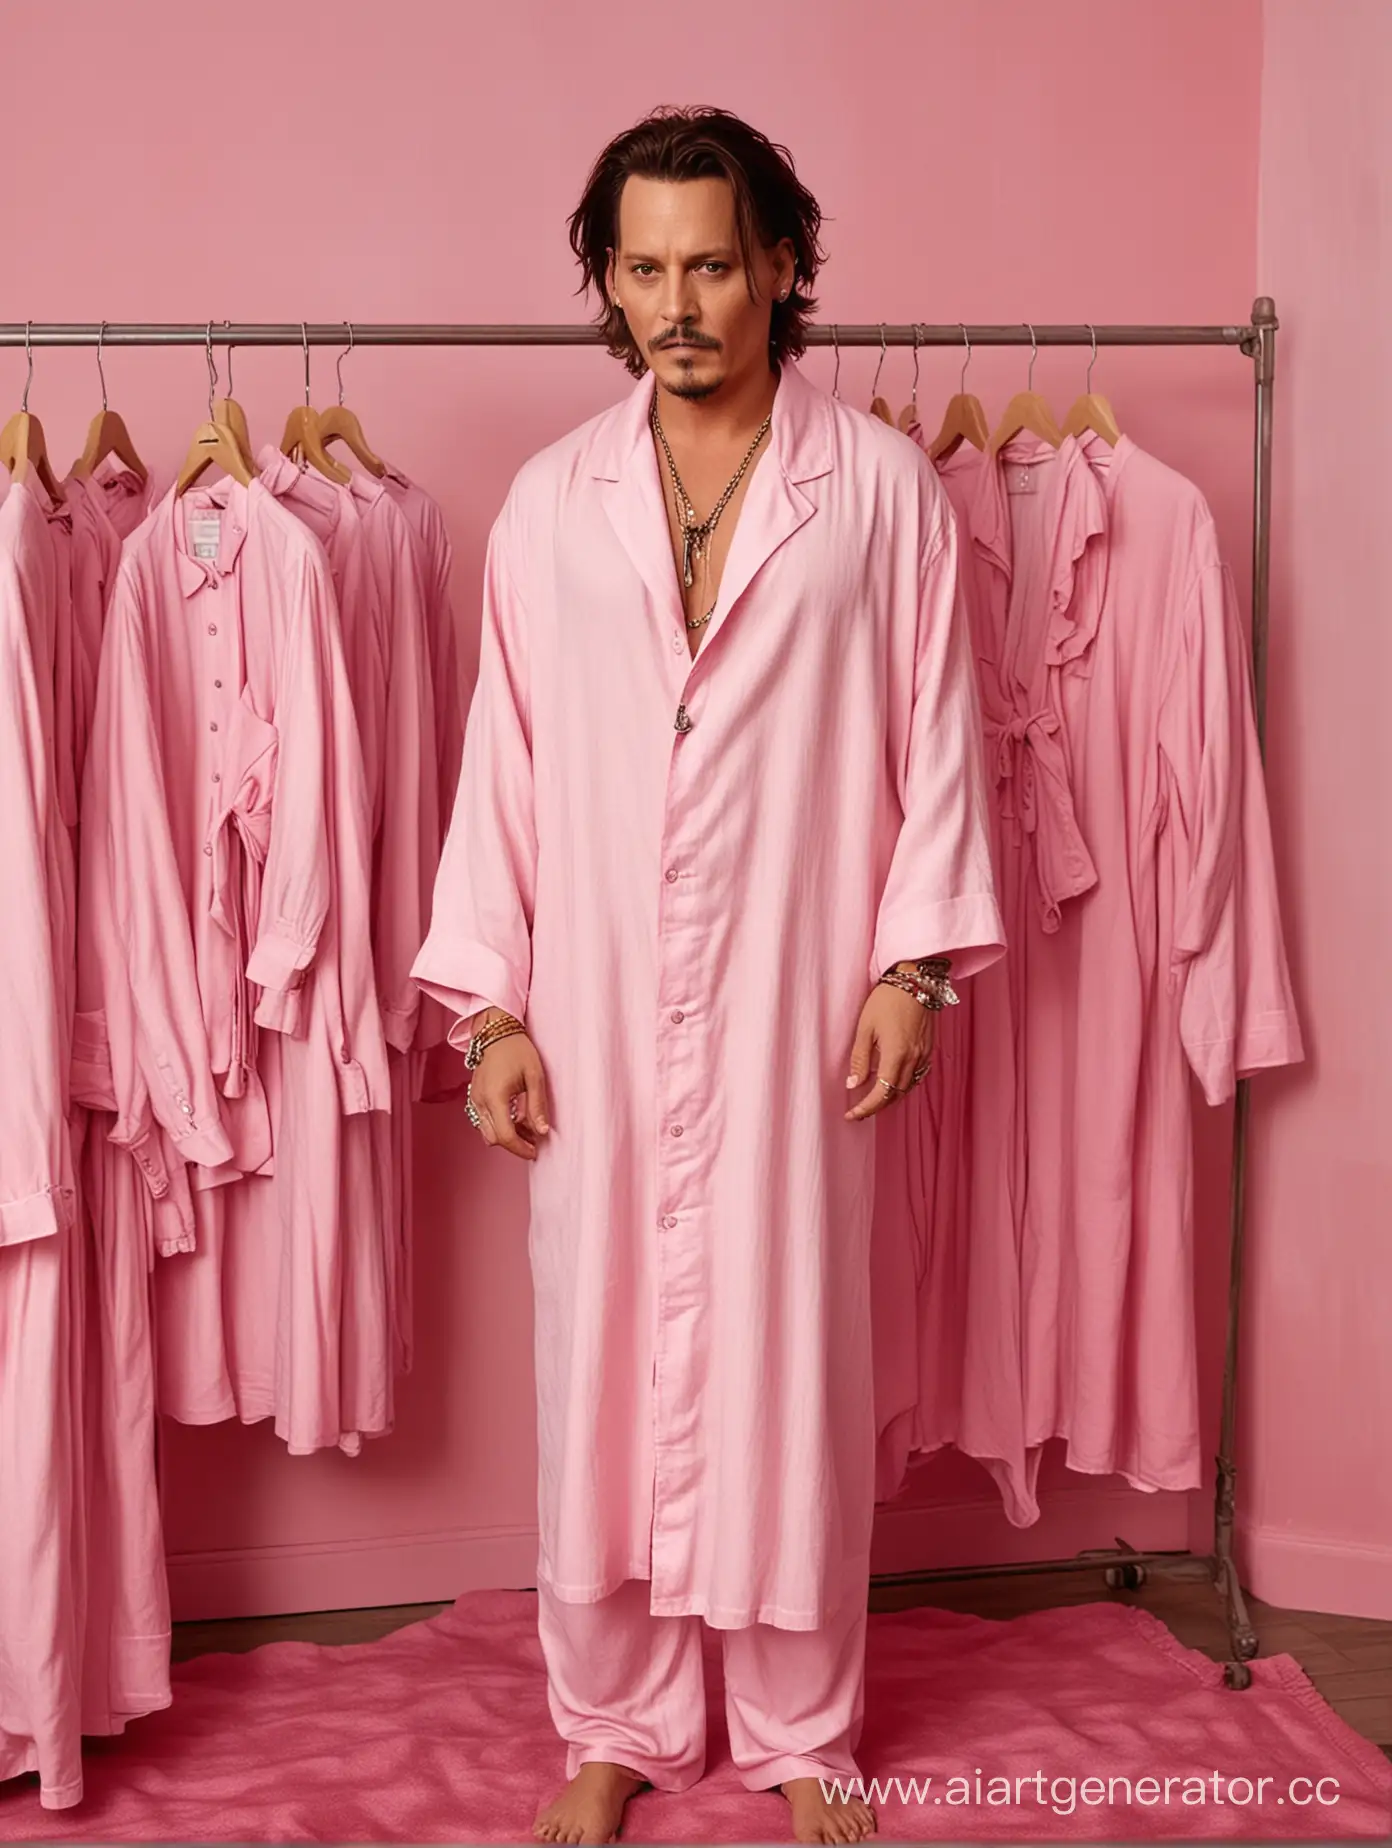 can you please make a realistic photo of johnny depp in a pink pijama in a pink room with a linen abayas hanging in a wardrobe